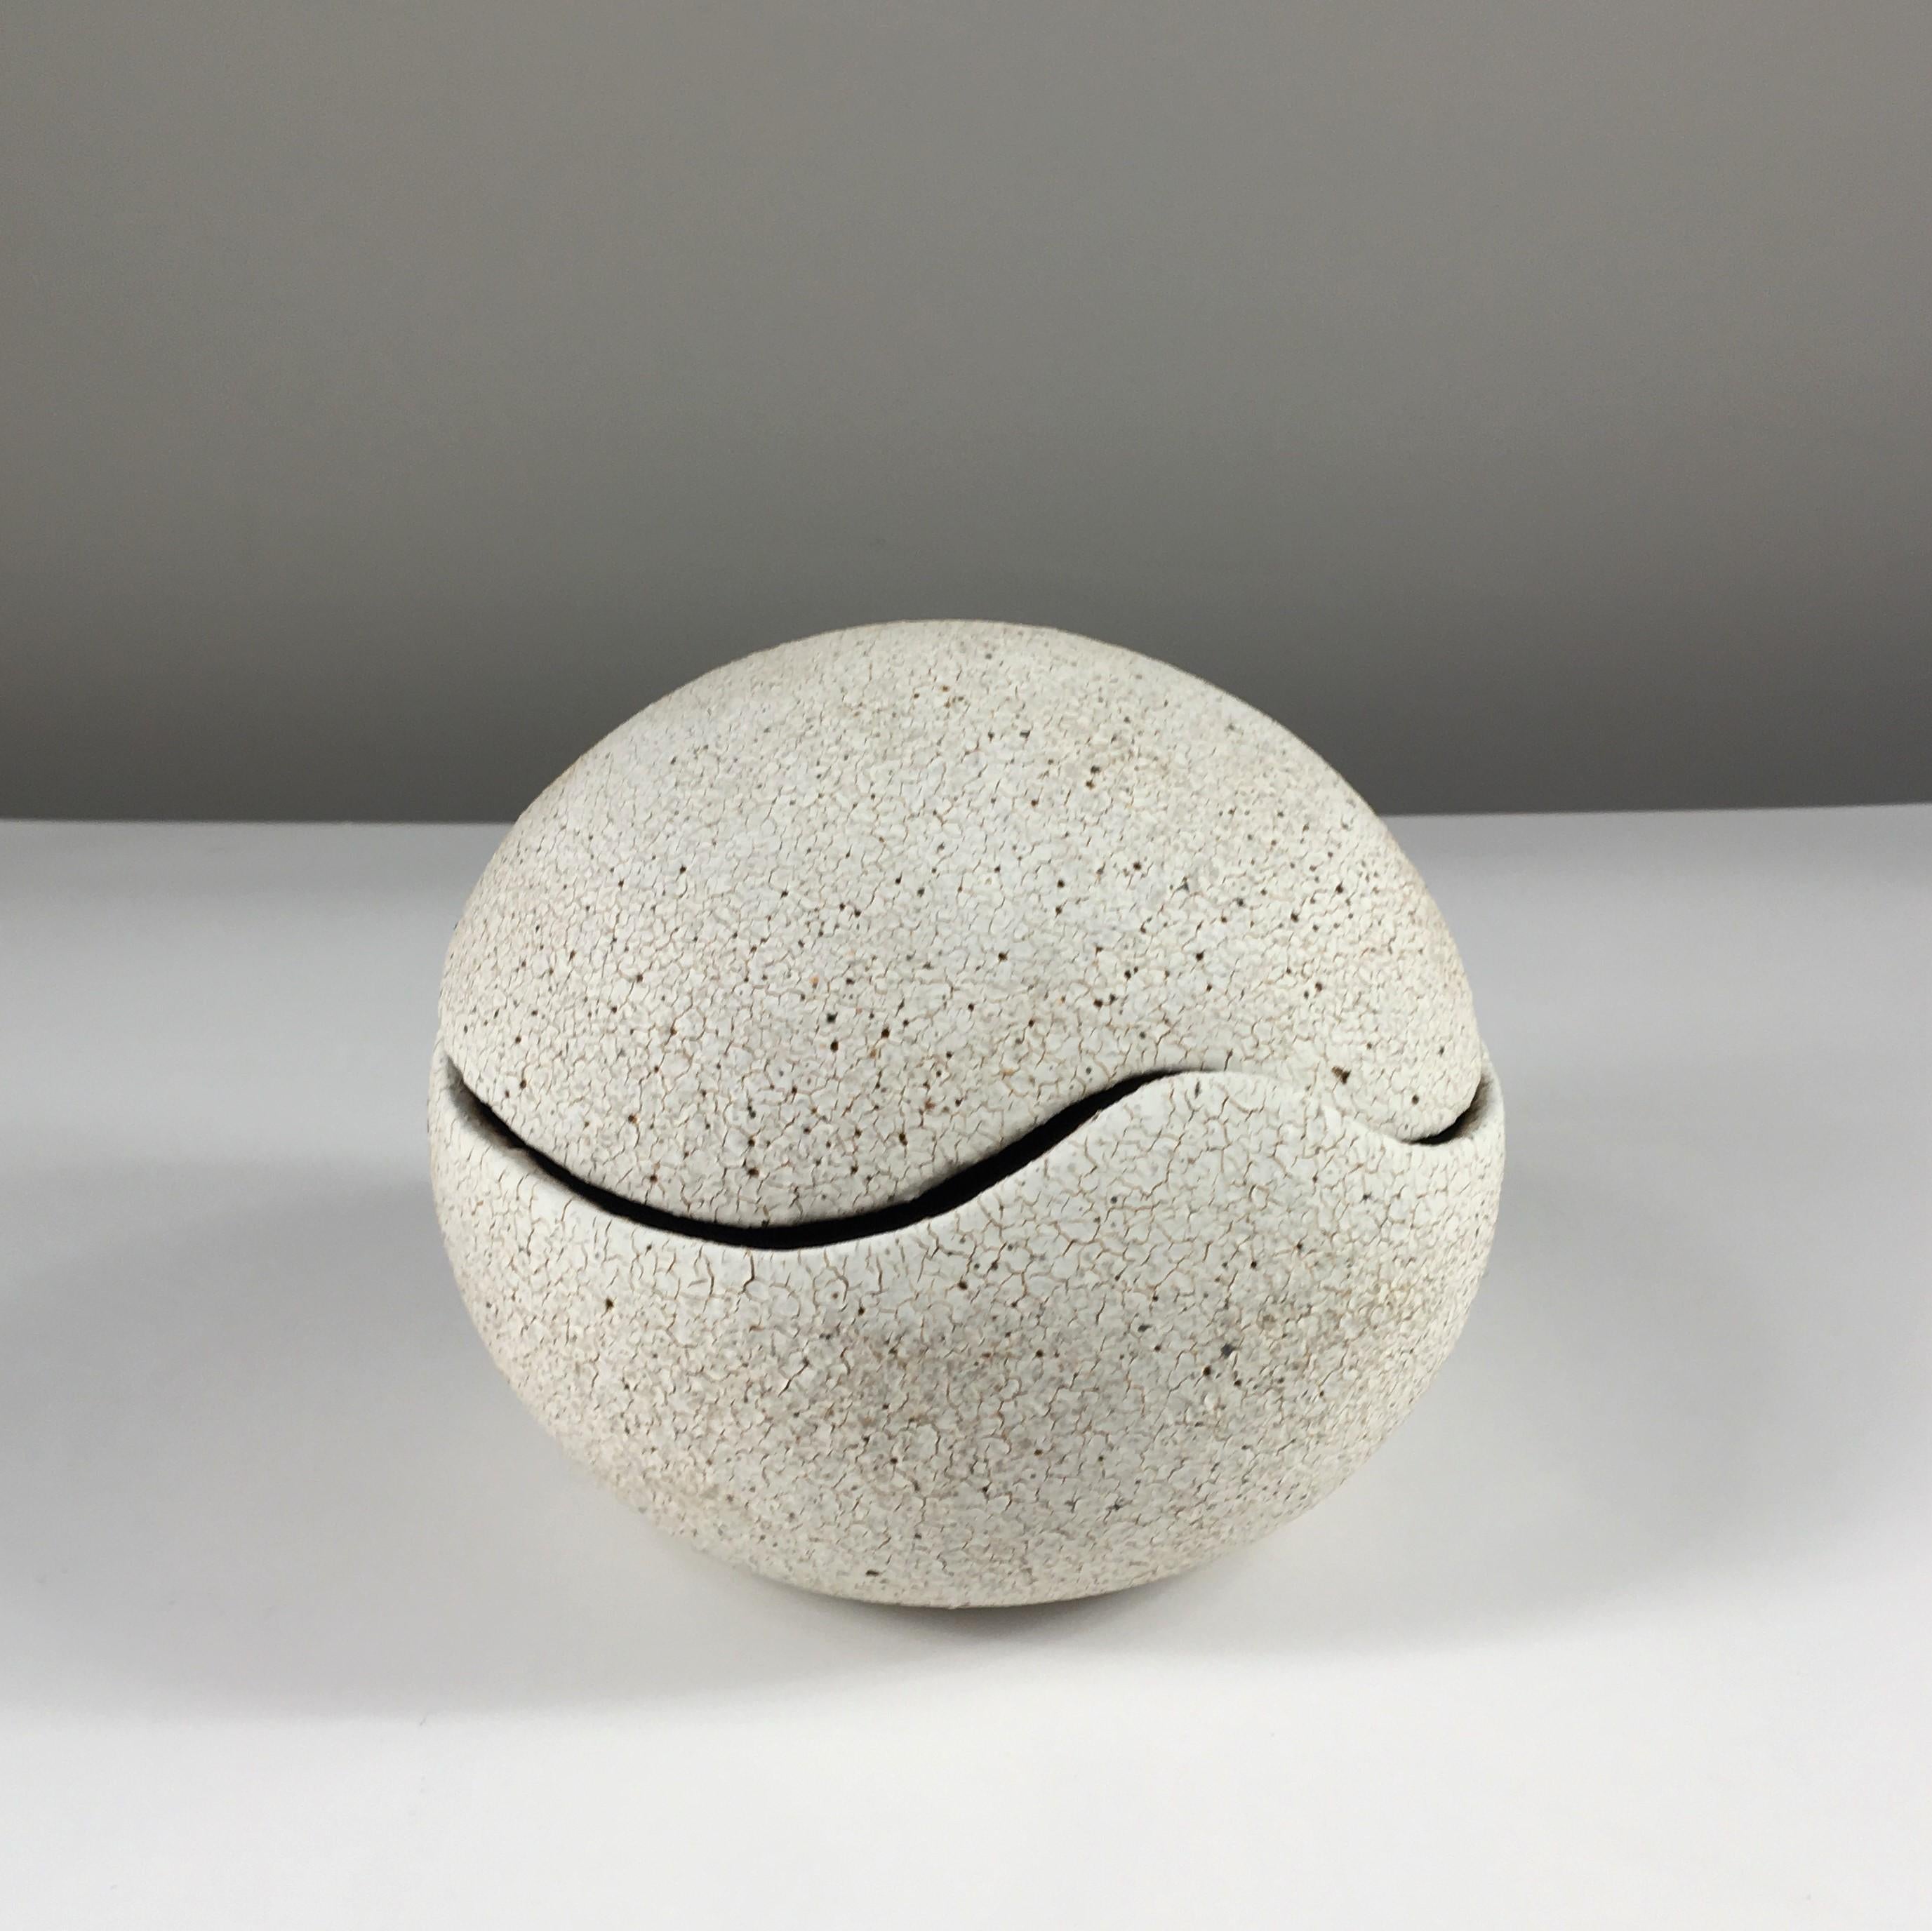 Covered Orb Vessel by Yumiko Kuga.  Dimensions: W 5.25